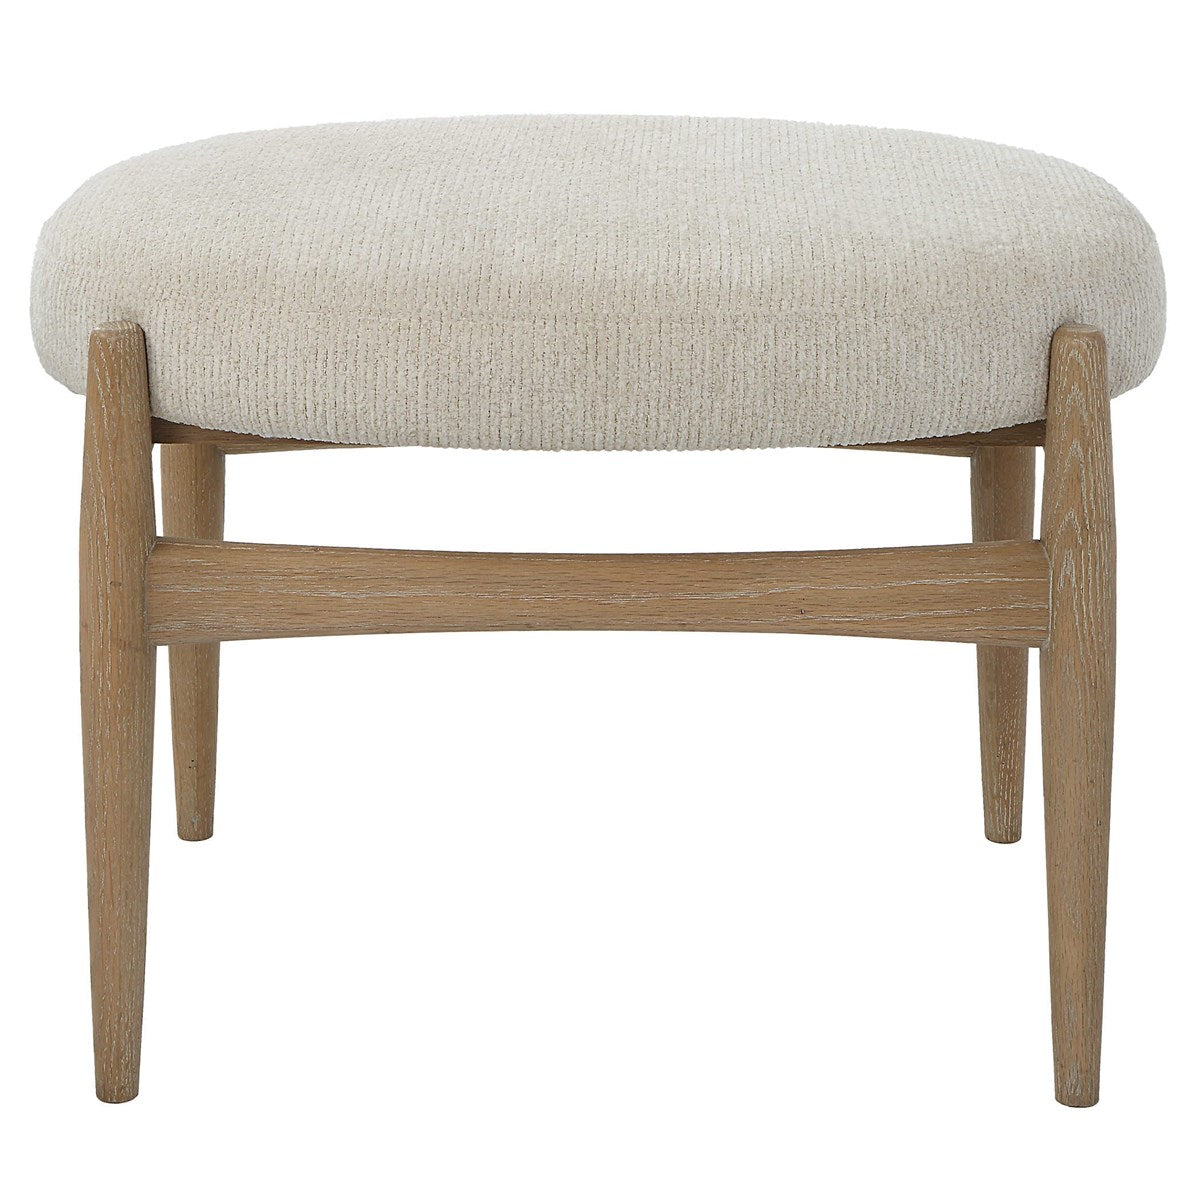 Uttermost, Acrobat Small Bench